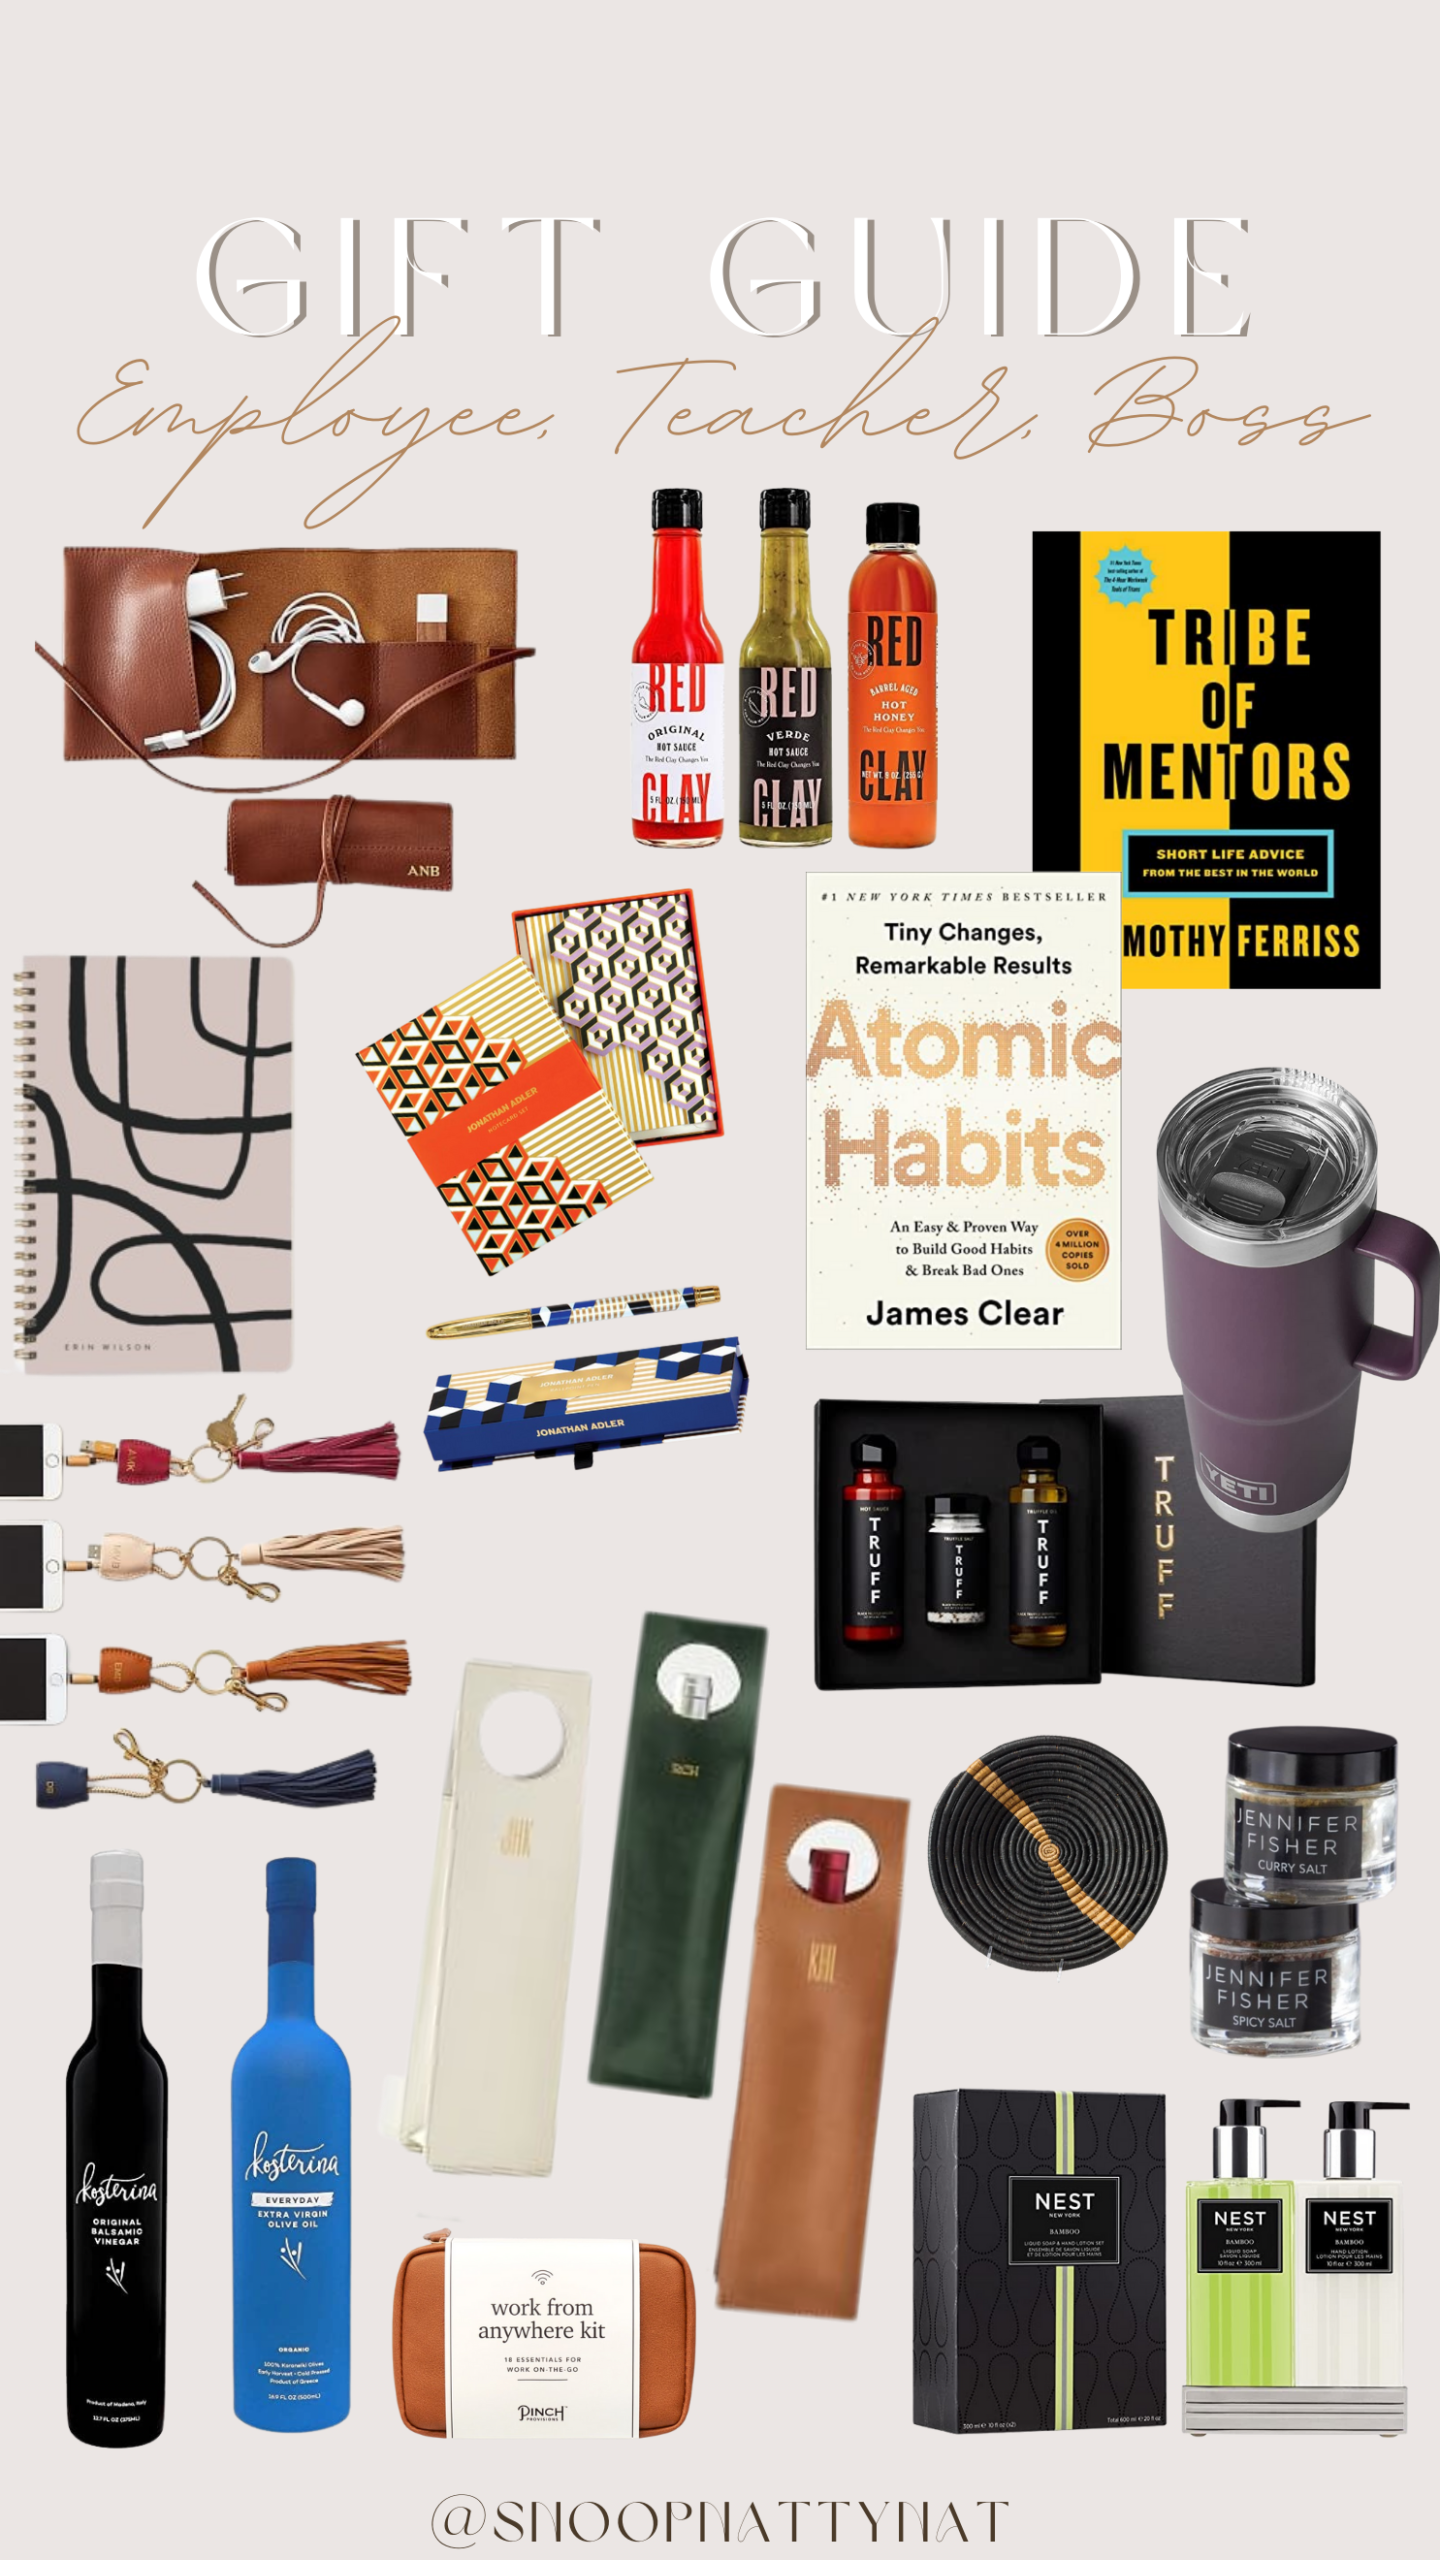 Gift Guide   Practical Gifts For Anyone - Natalie Mason